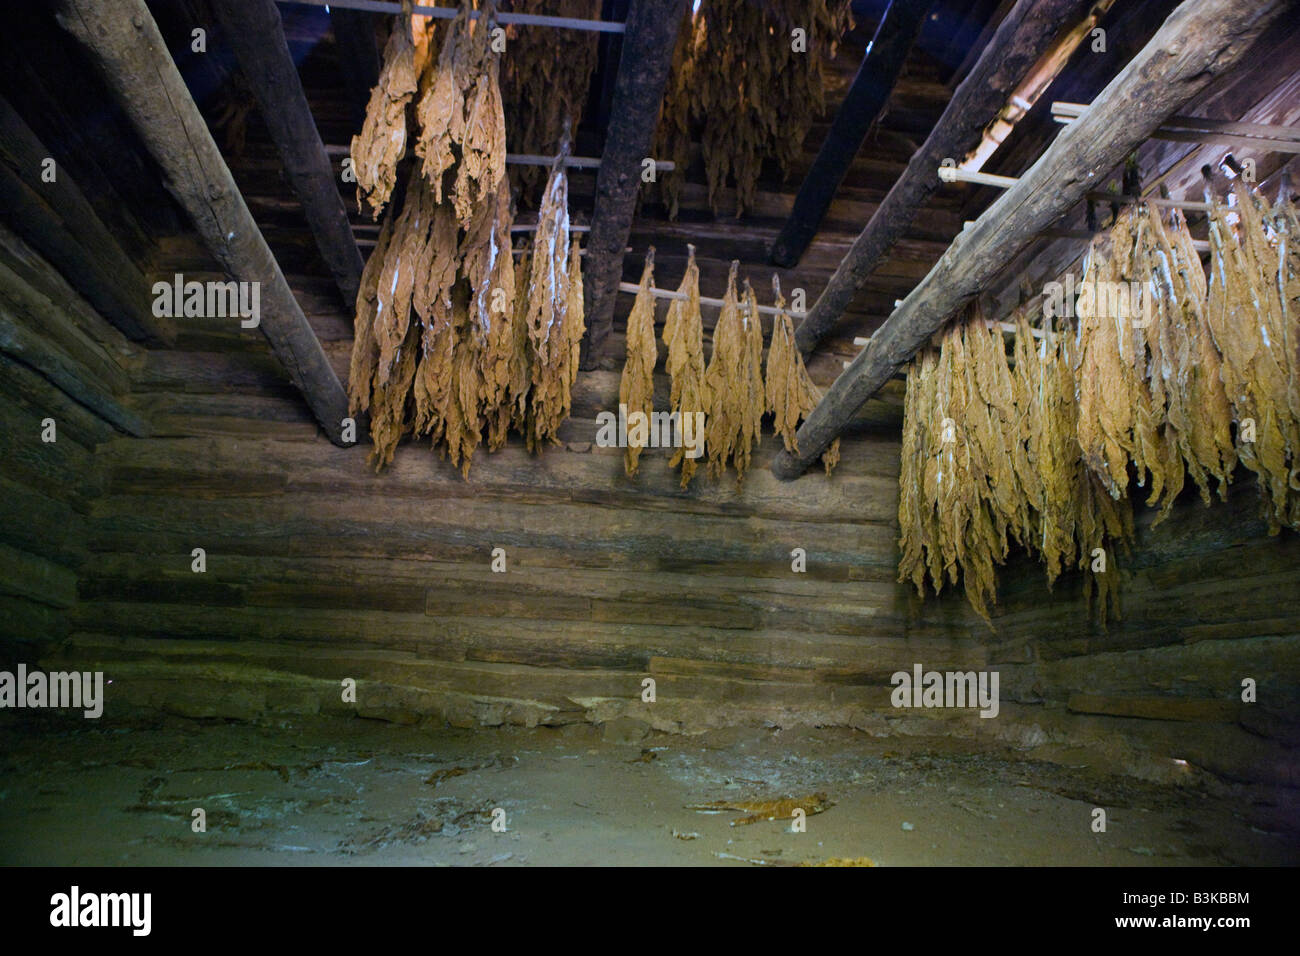 Tobacco hangs and dries inside the tobacco barn, Booker T. Washington National Monument, Hardy, Virginia Stock Photo